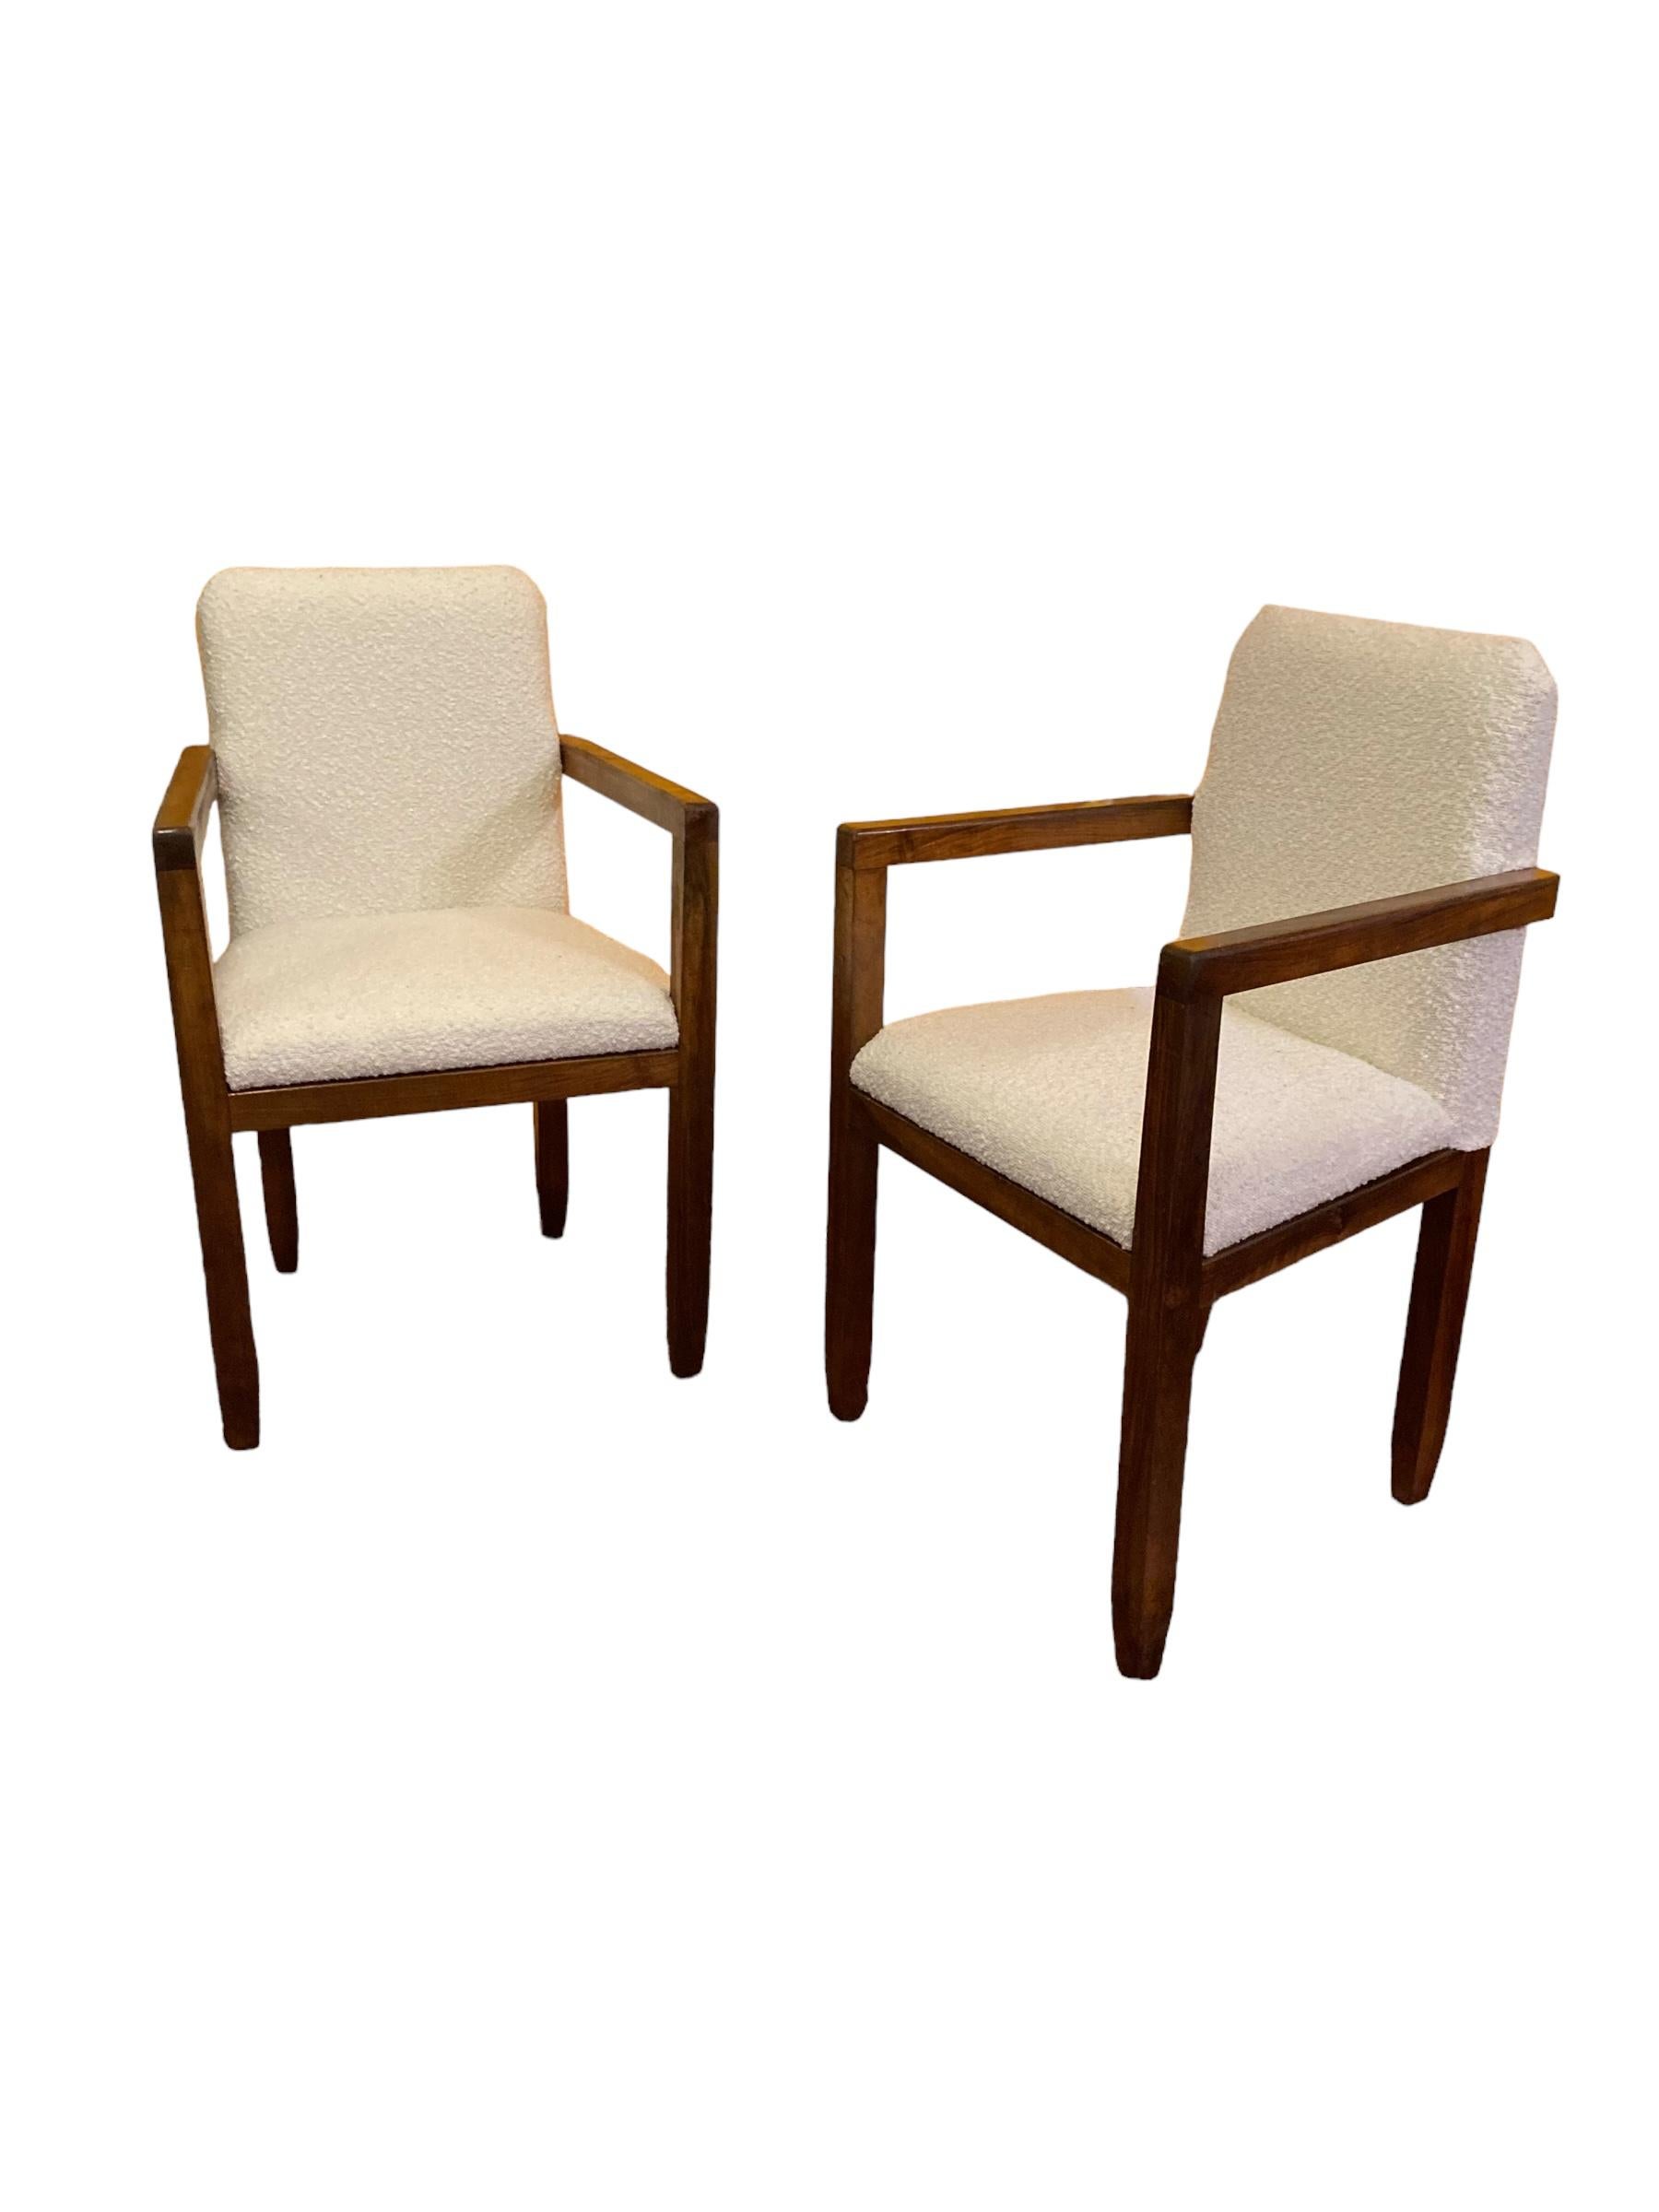 British A Pair of Art Deco Mahogany framed Armchairs, White Boucle Upholstery 1920's For Sale